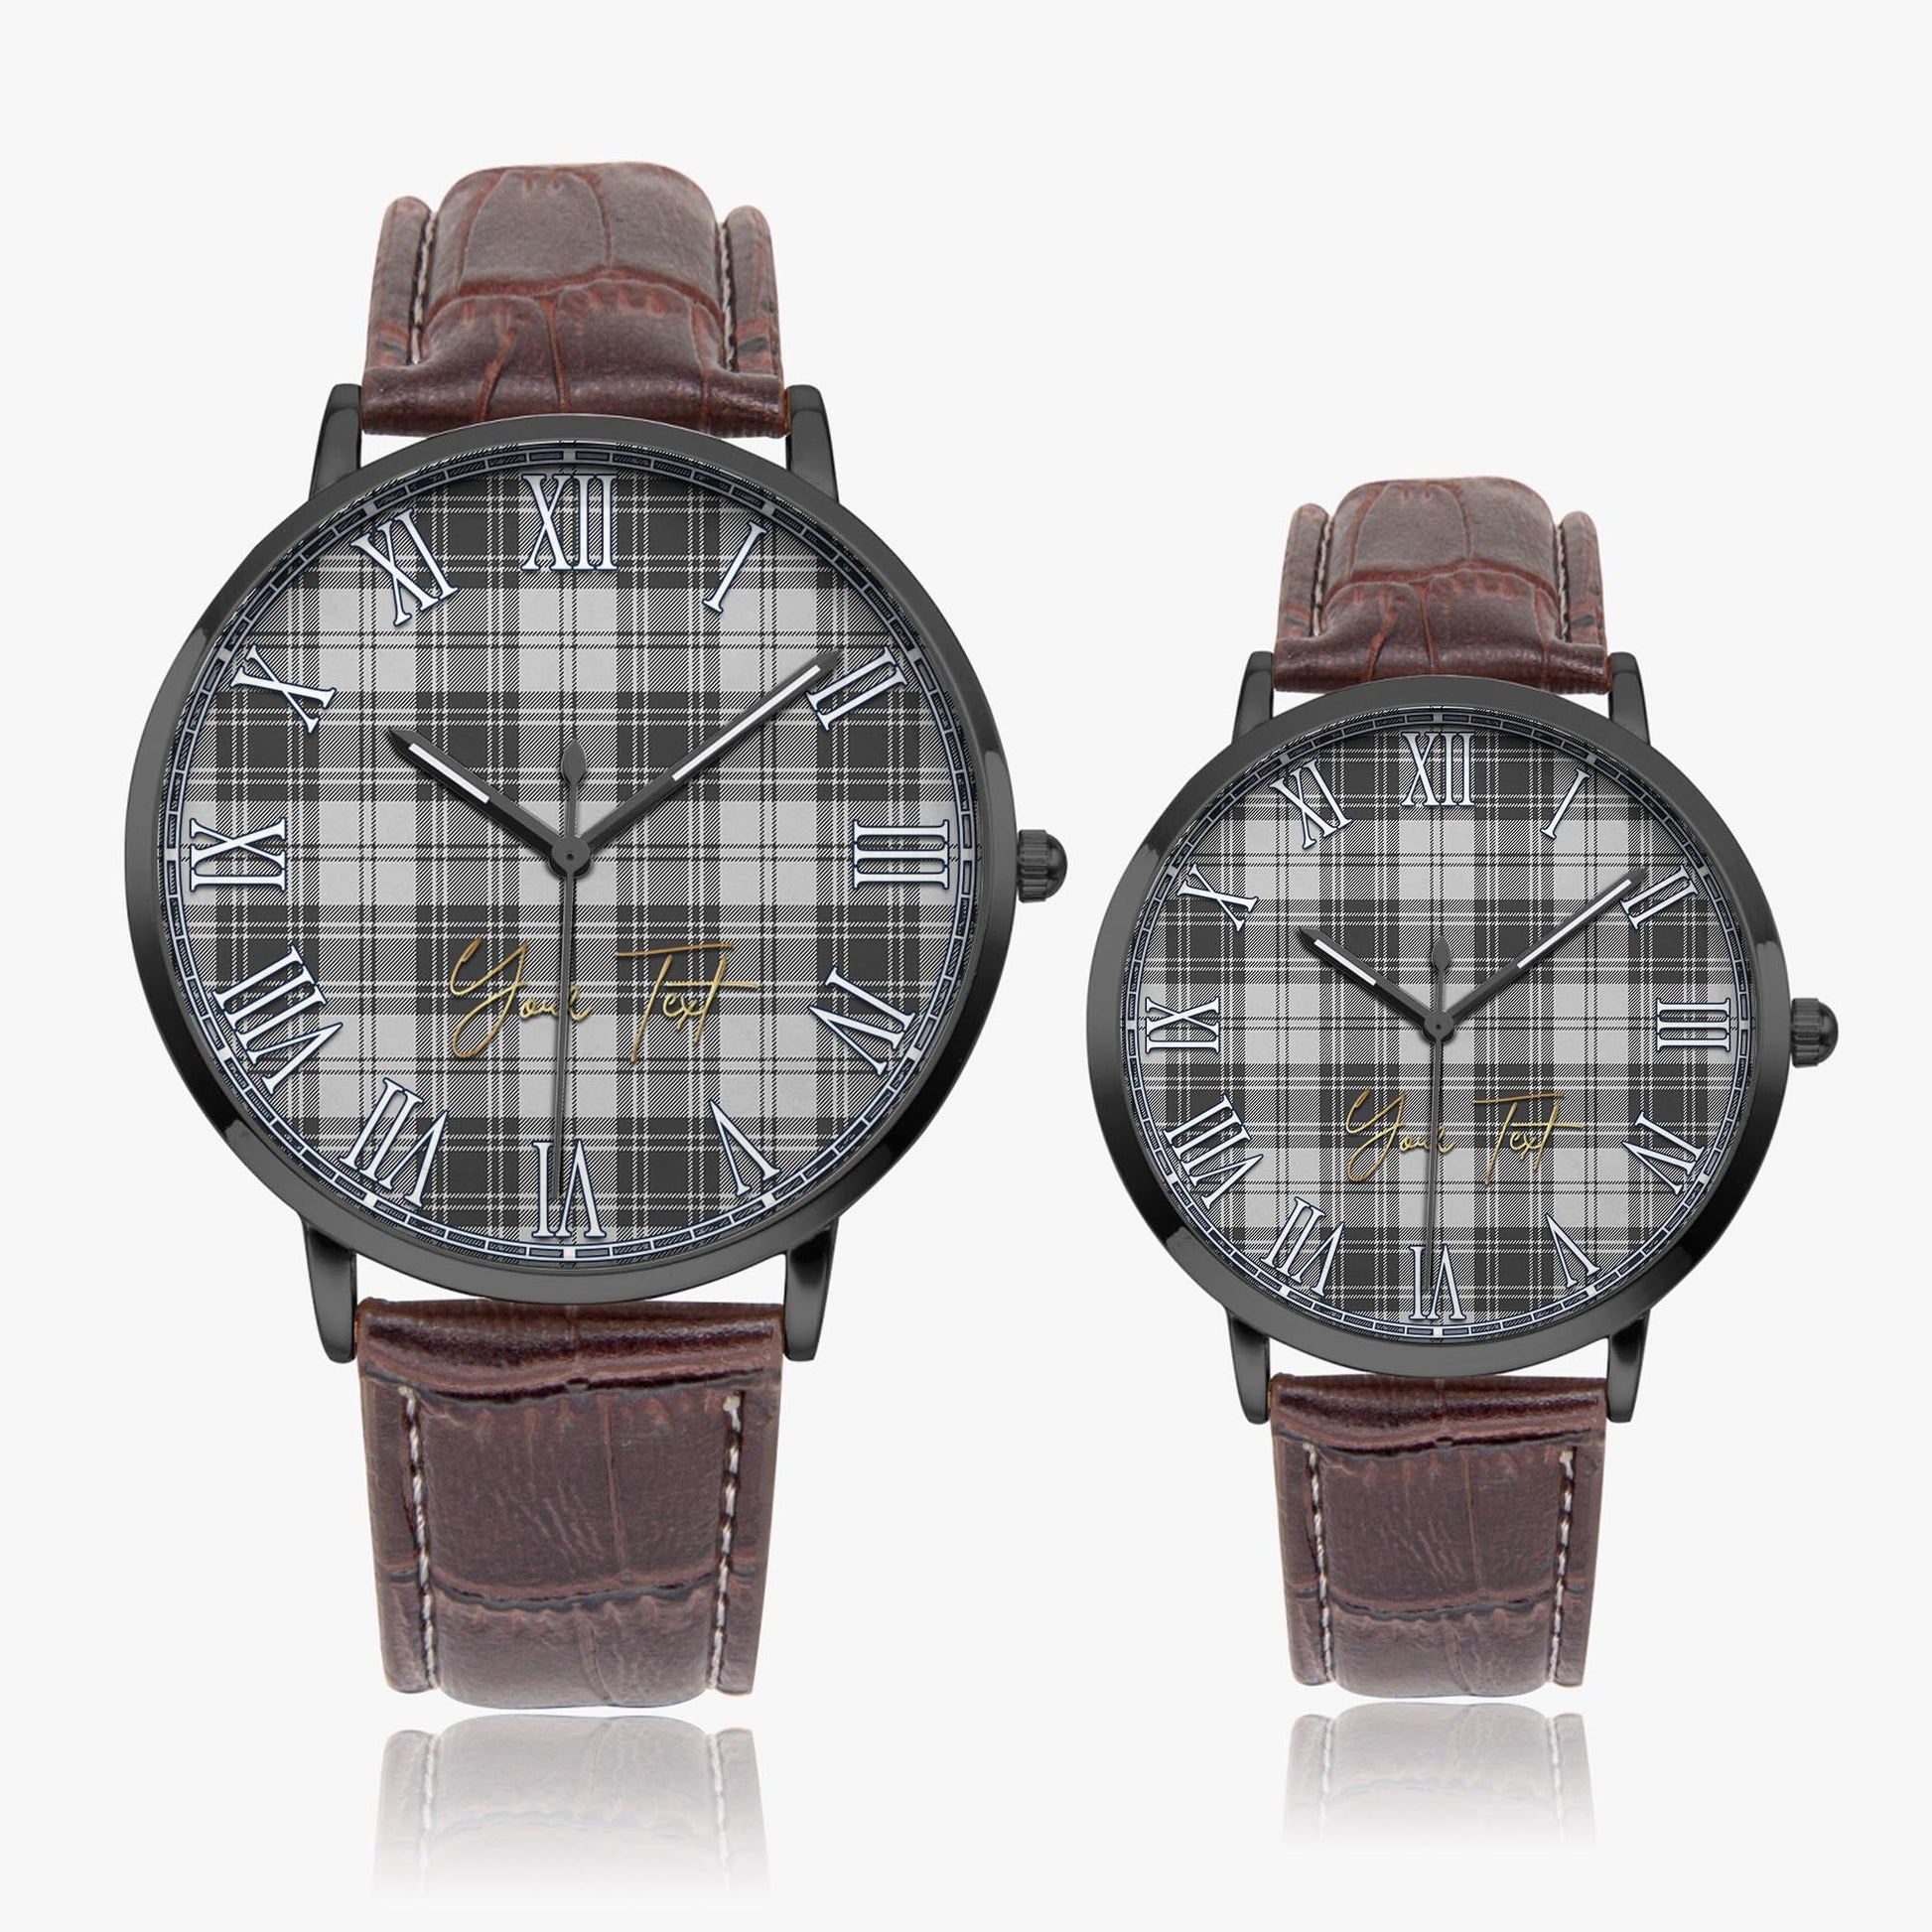 Glen Tartan Personalized Your Text Leather Trap Quartz Watch Ultra Thin Black Case With Brown Leather Strap - Tartanvibesclothing